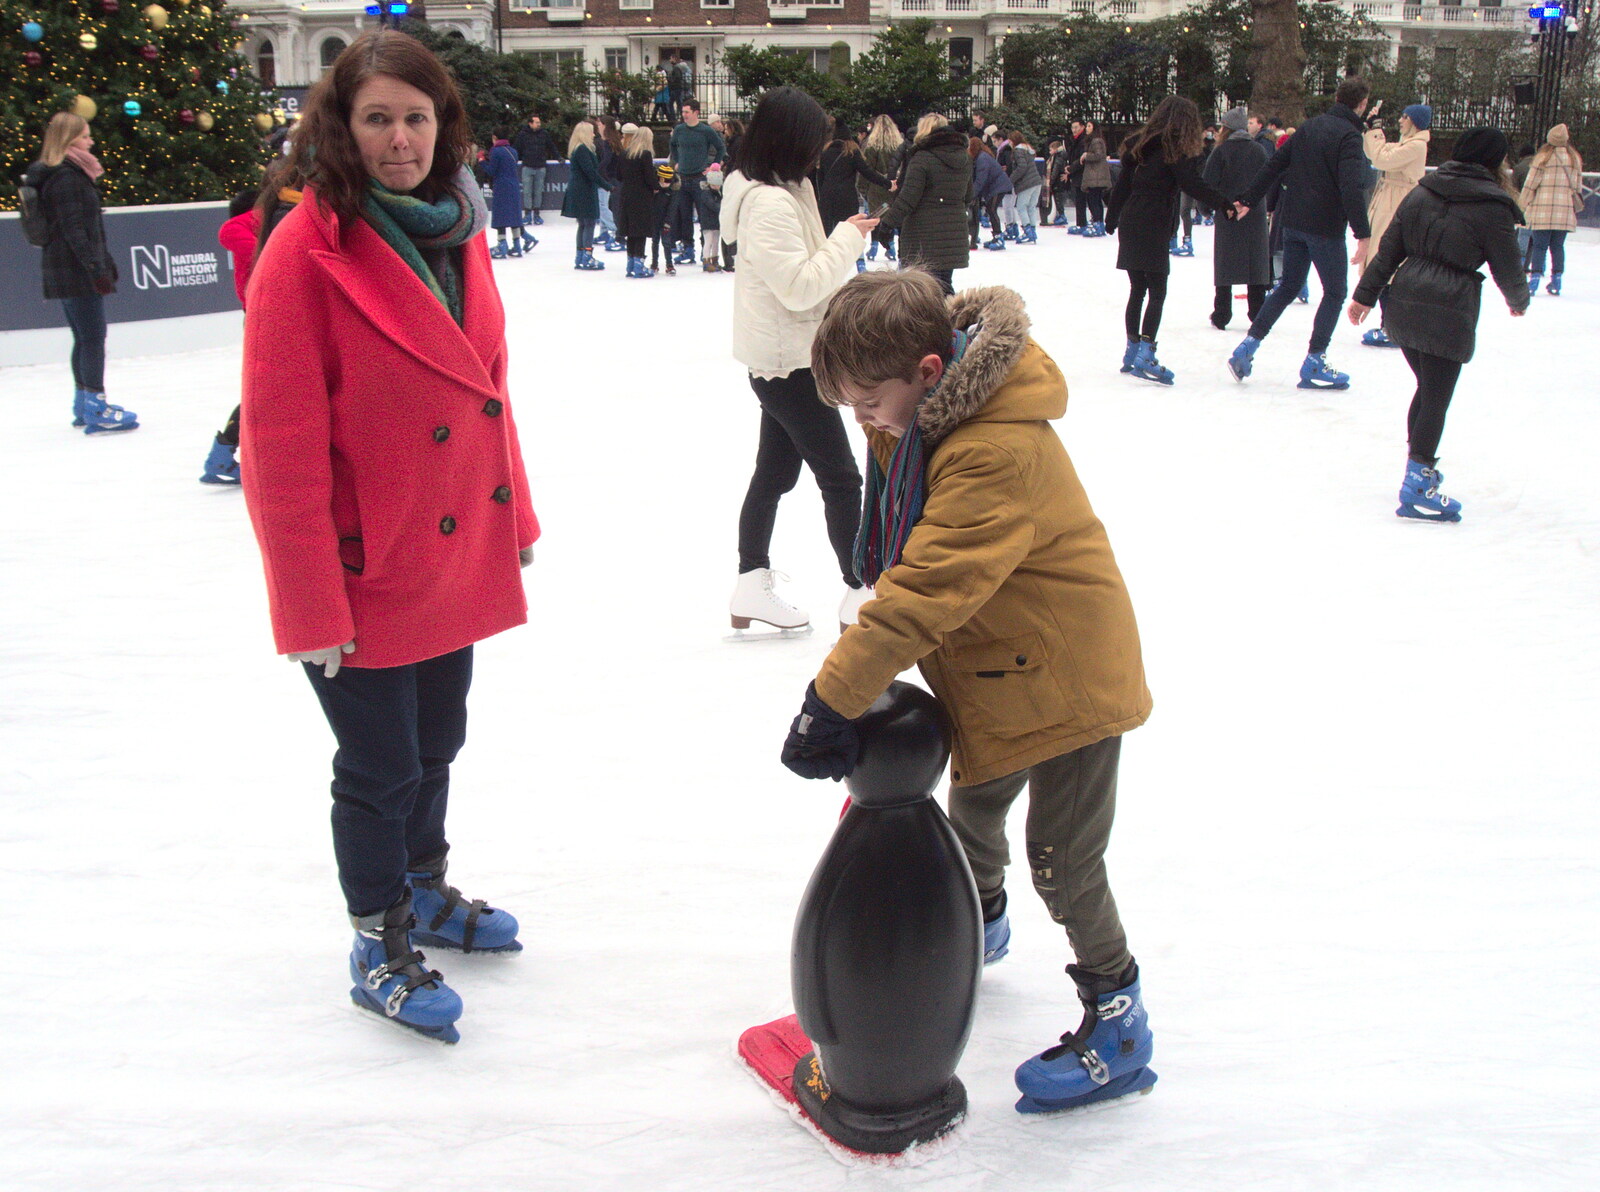 Harry's got a Penguin to help with skating from A Trip to the Natural History Museum, Kensington, London - 15th January 2022